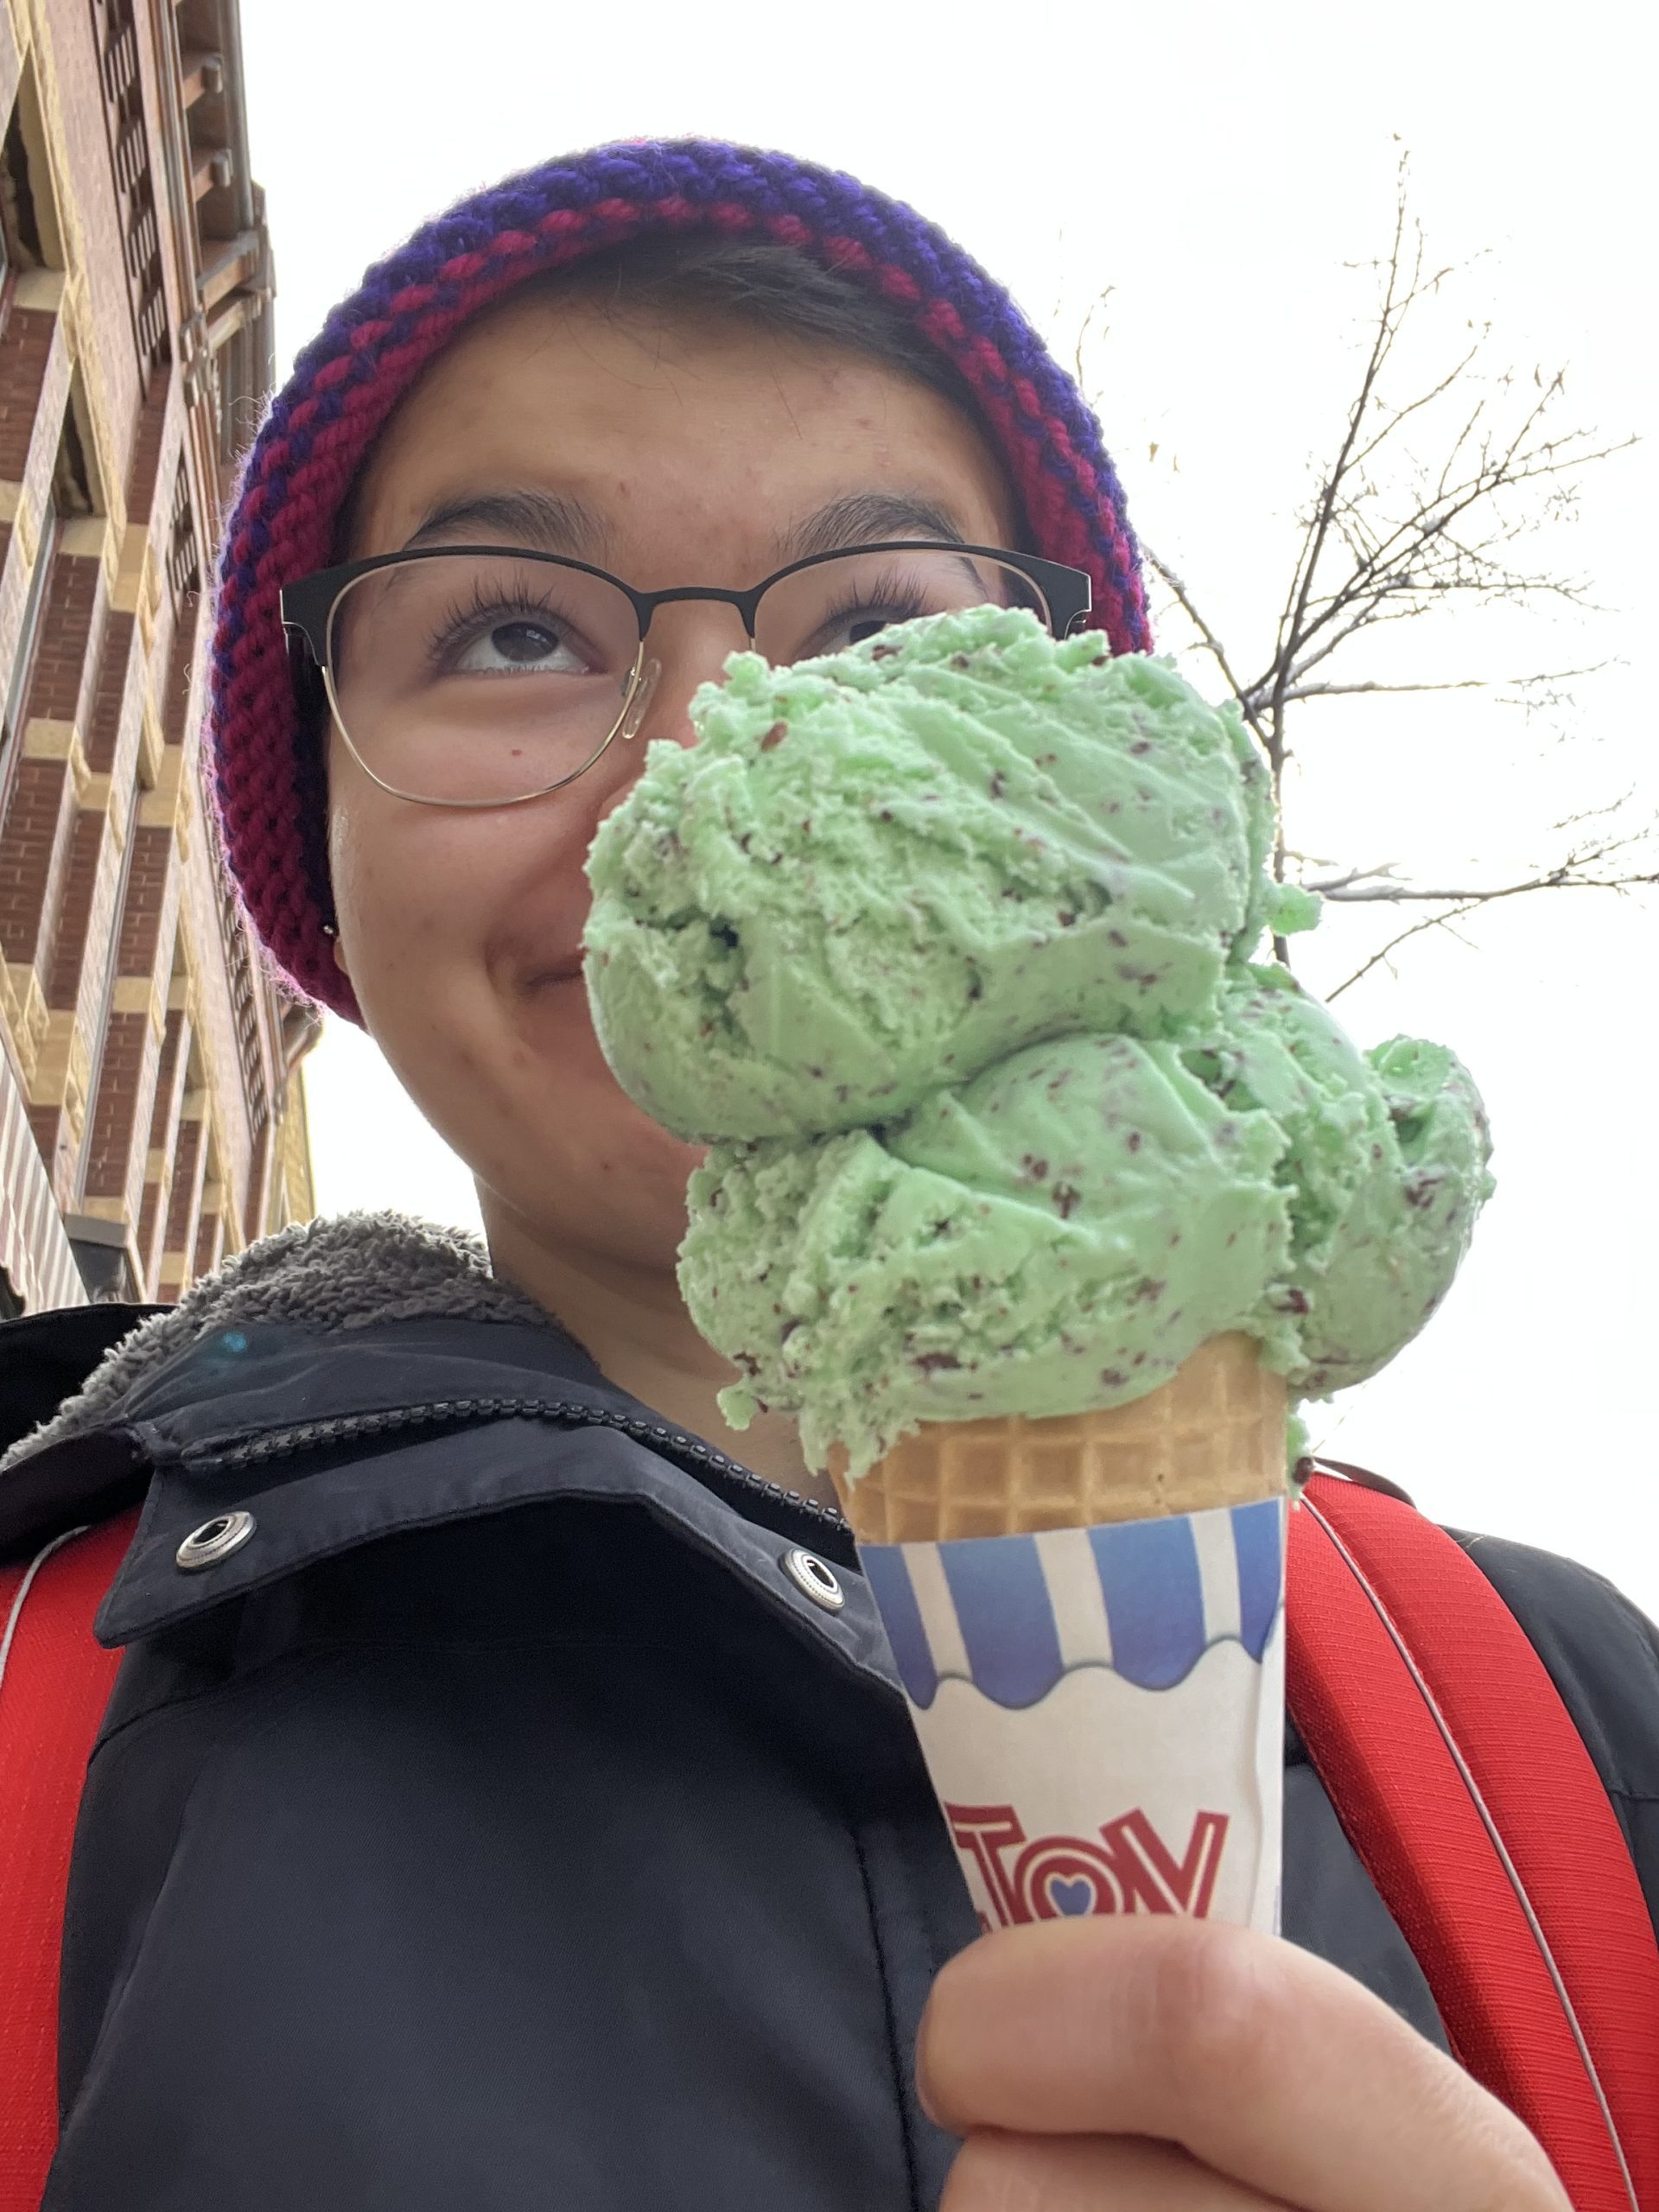 Student with a mint chocolate chip ice cream cone